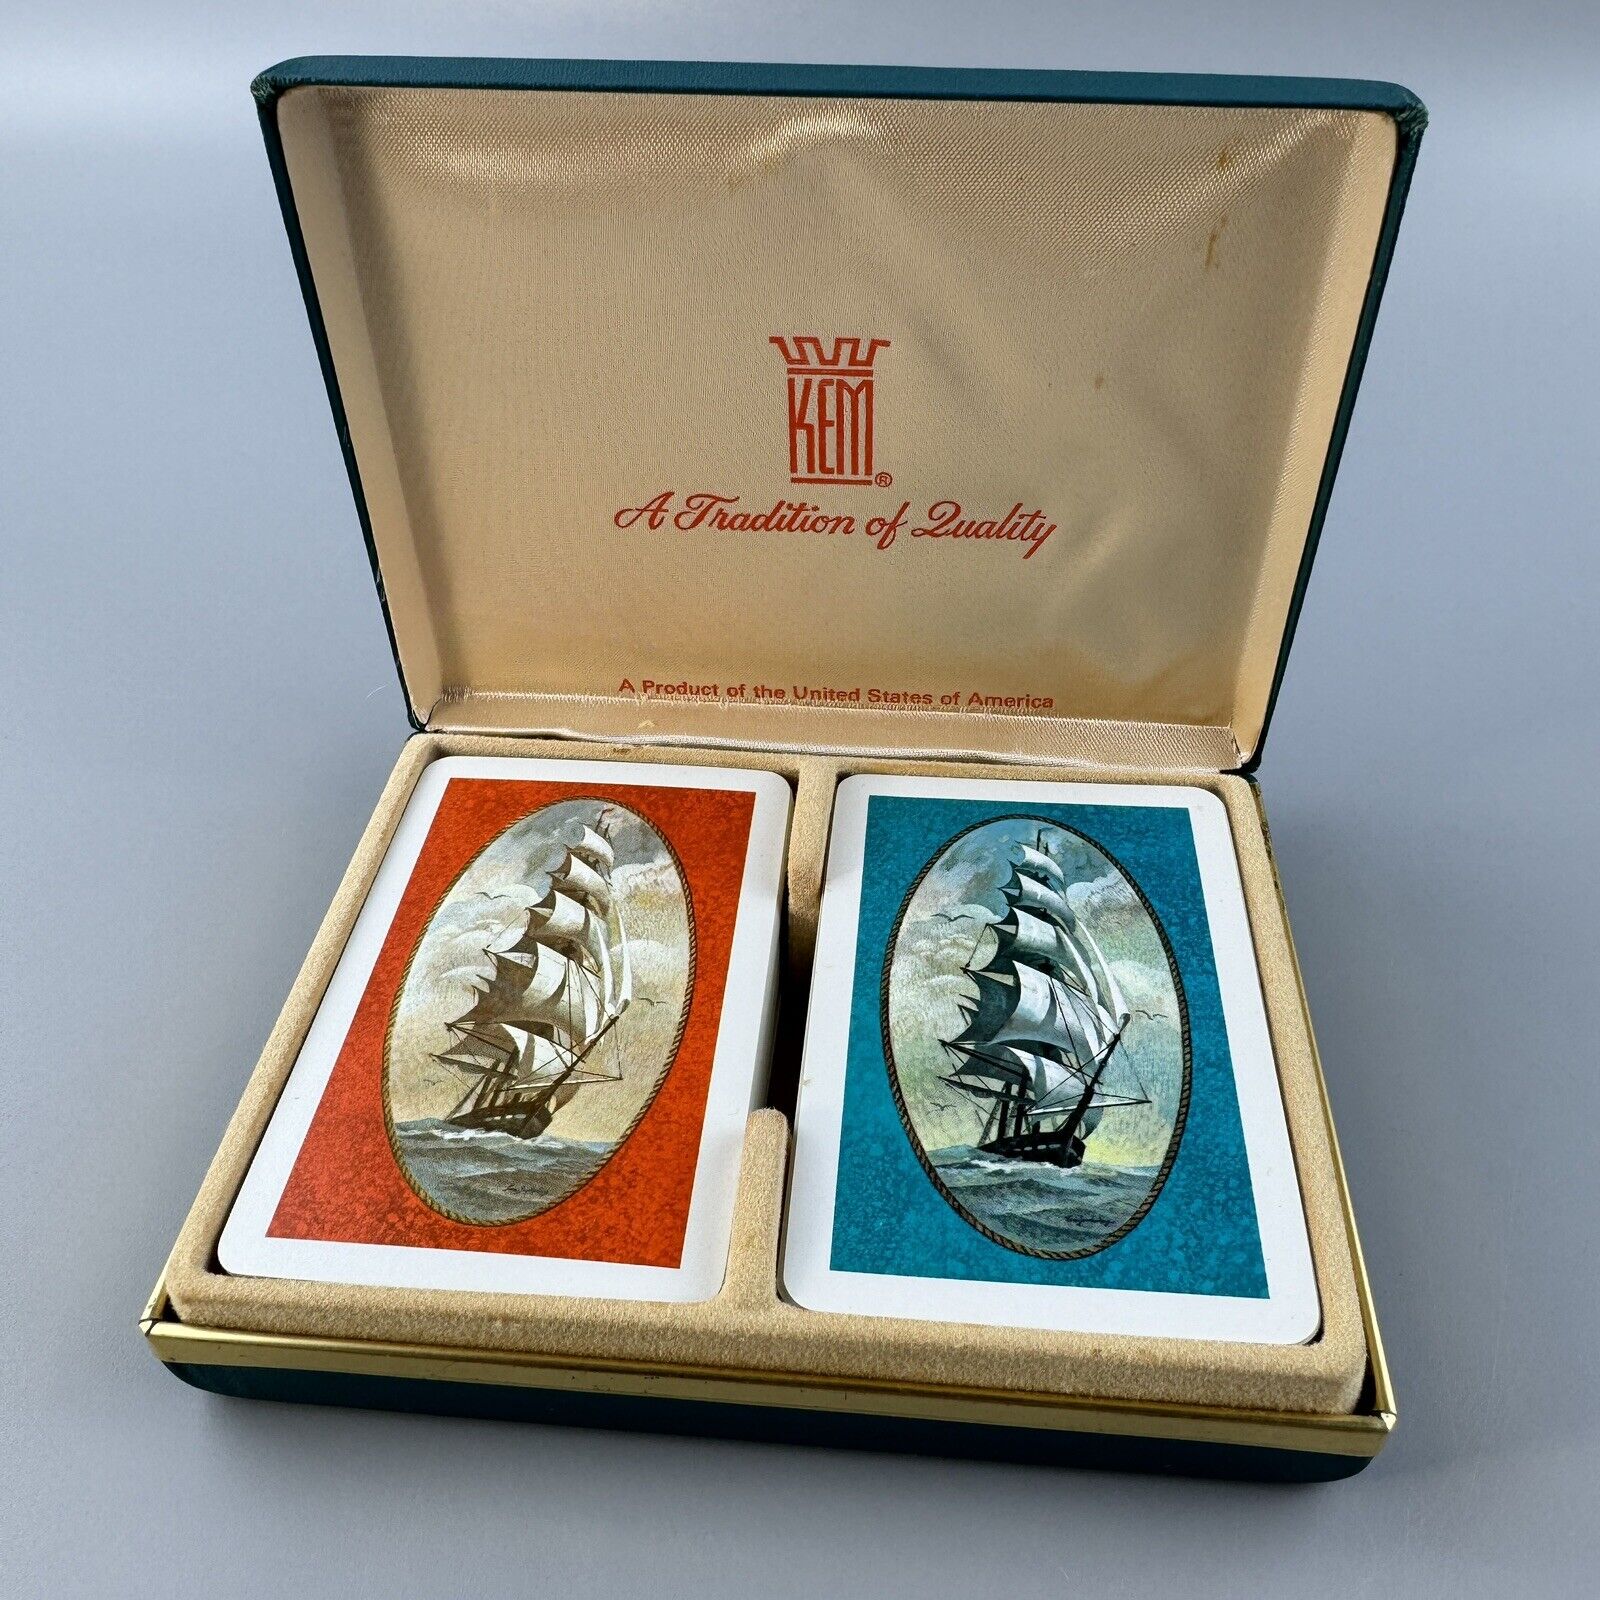 1947 Kem Playing Cards Double Deck Clipper Ship with Teal Hinged Case - Vintage